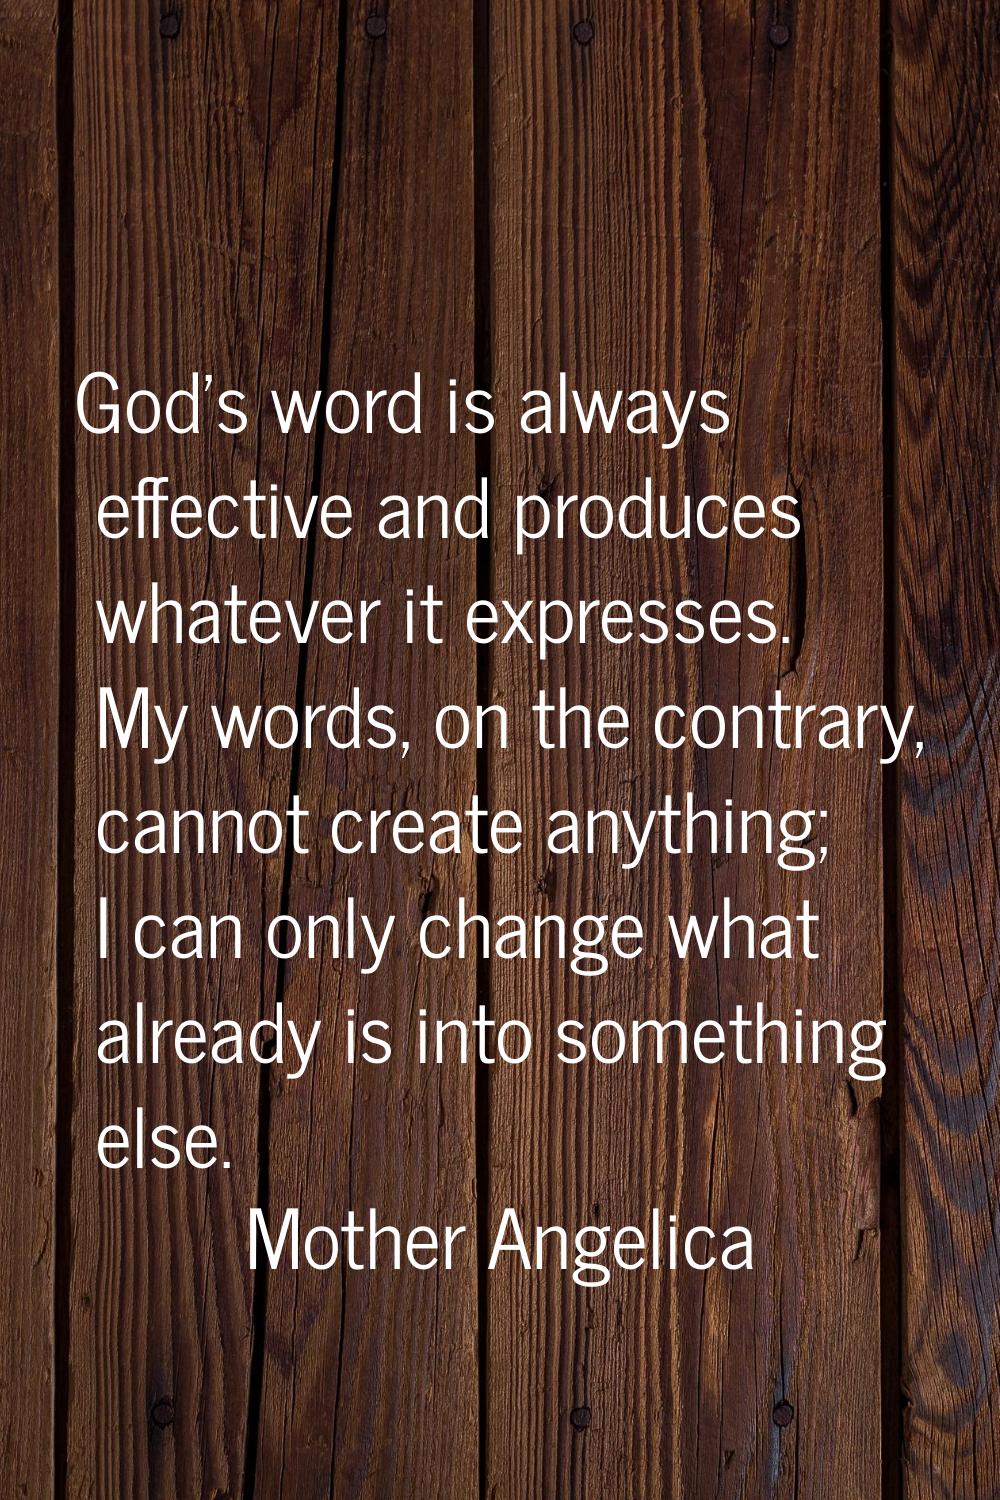 God's word is always effective and produces whatever it expresses. My words, on the contrary, canno